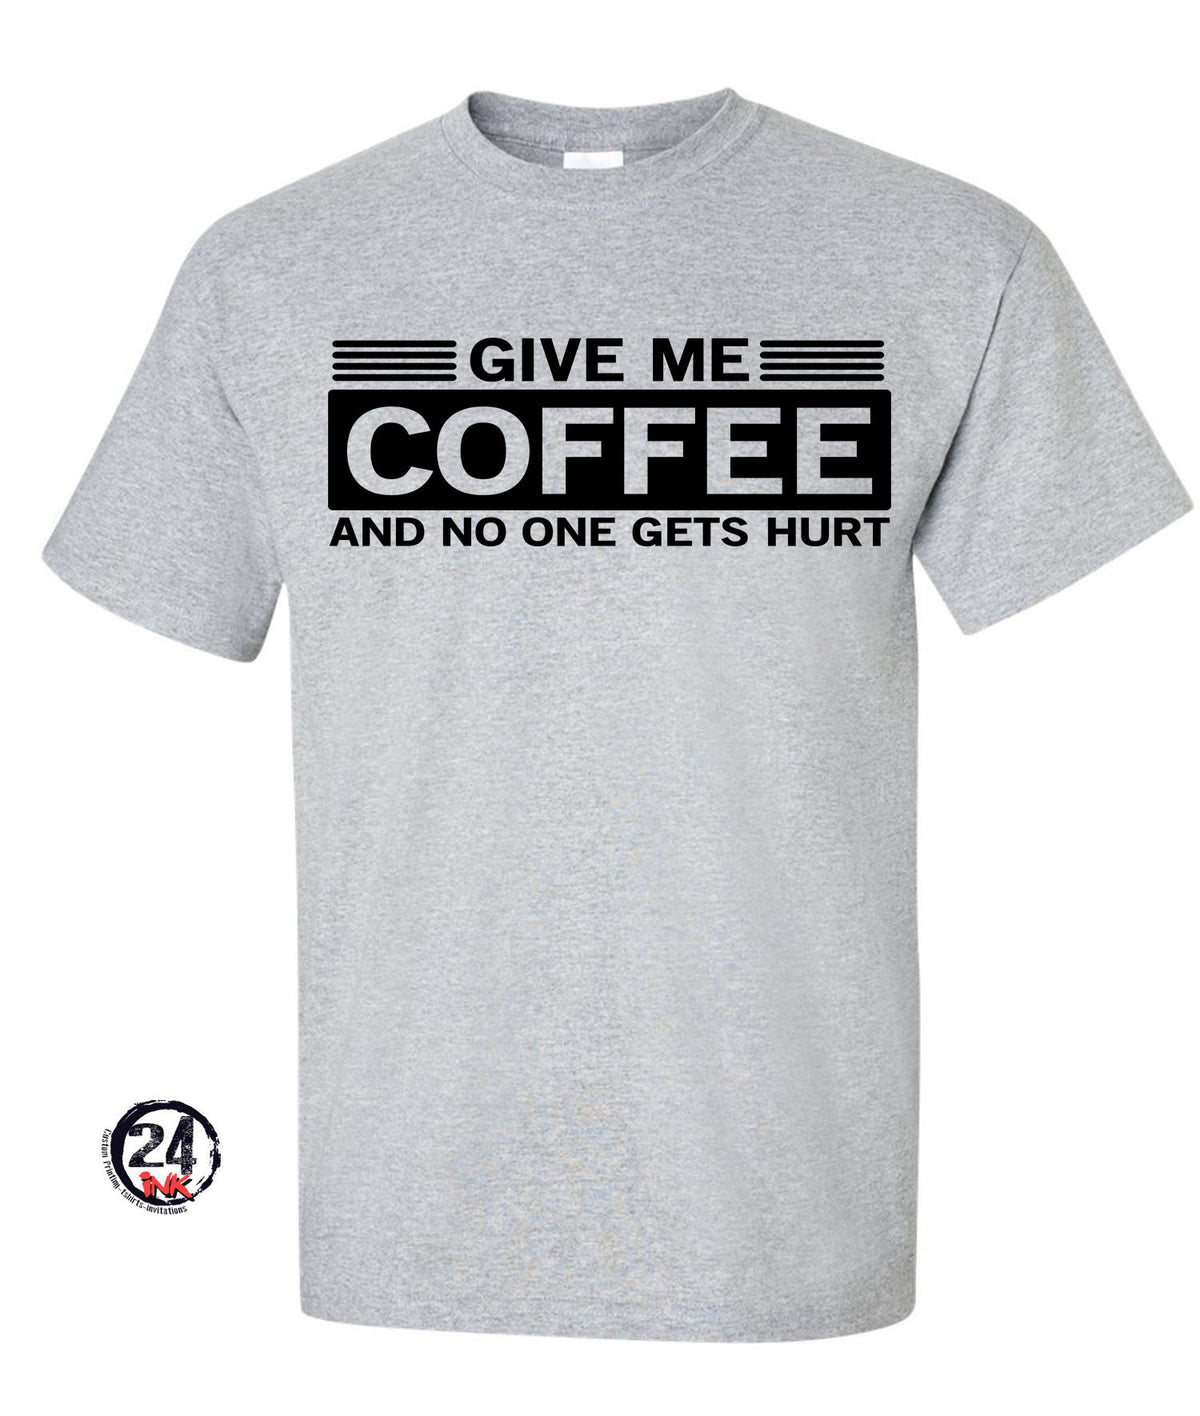 Give me coffee and no one gets hurt Shirt